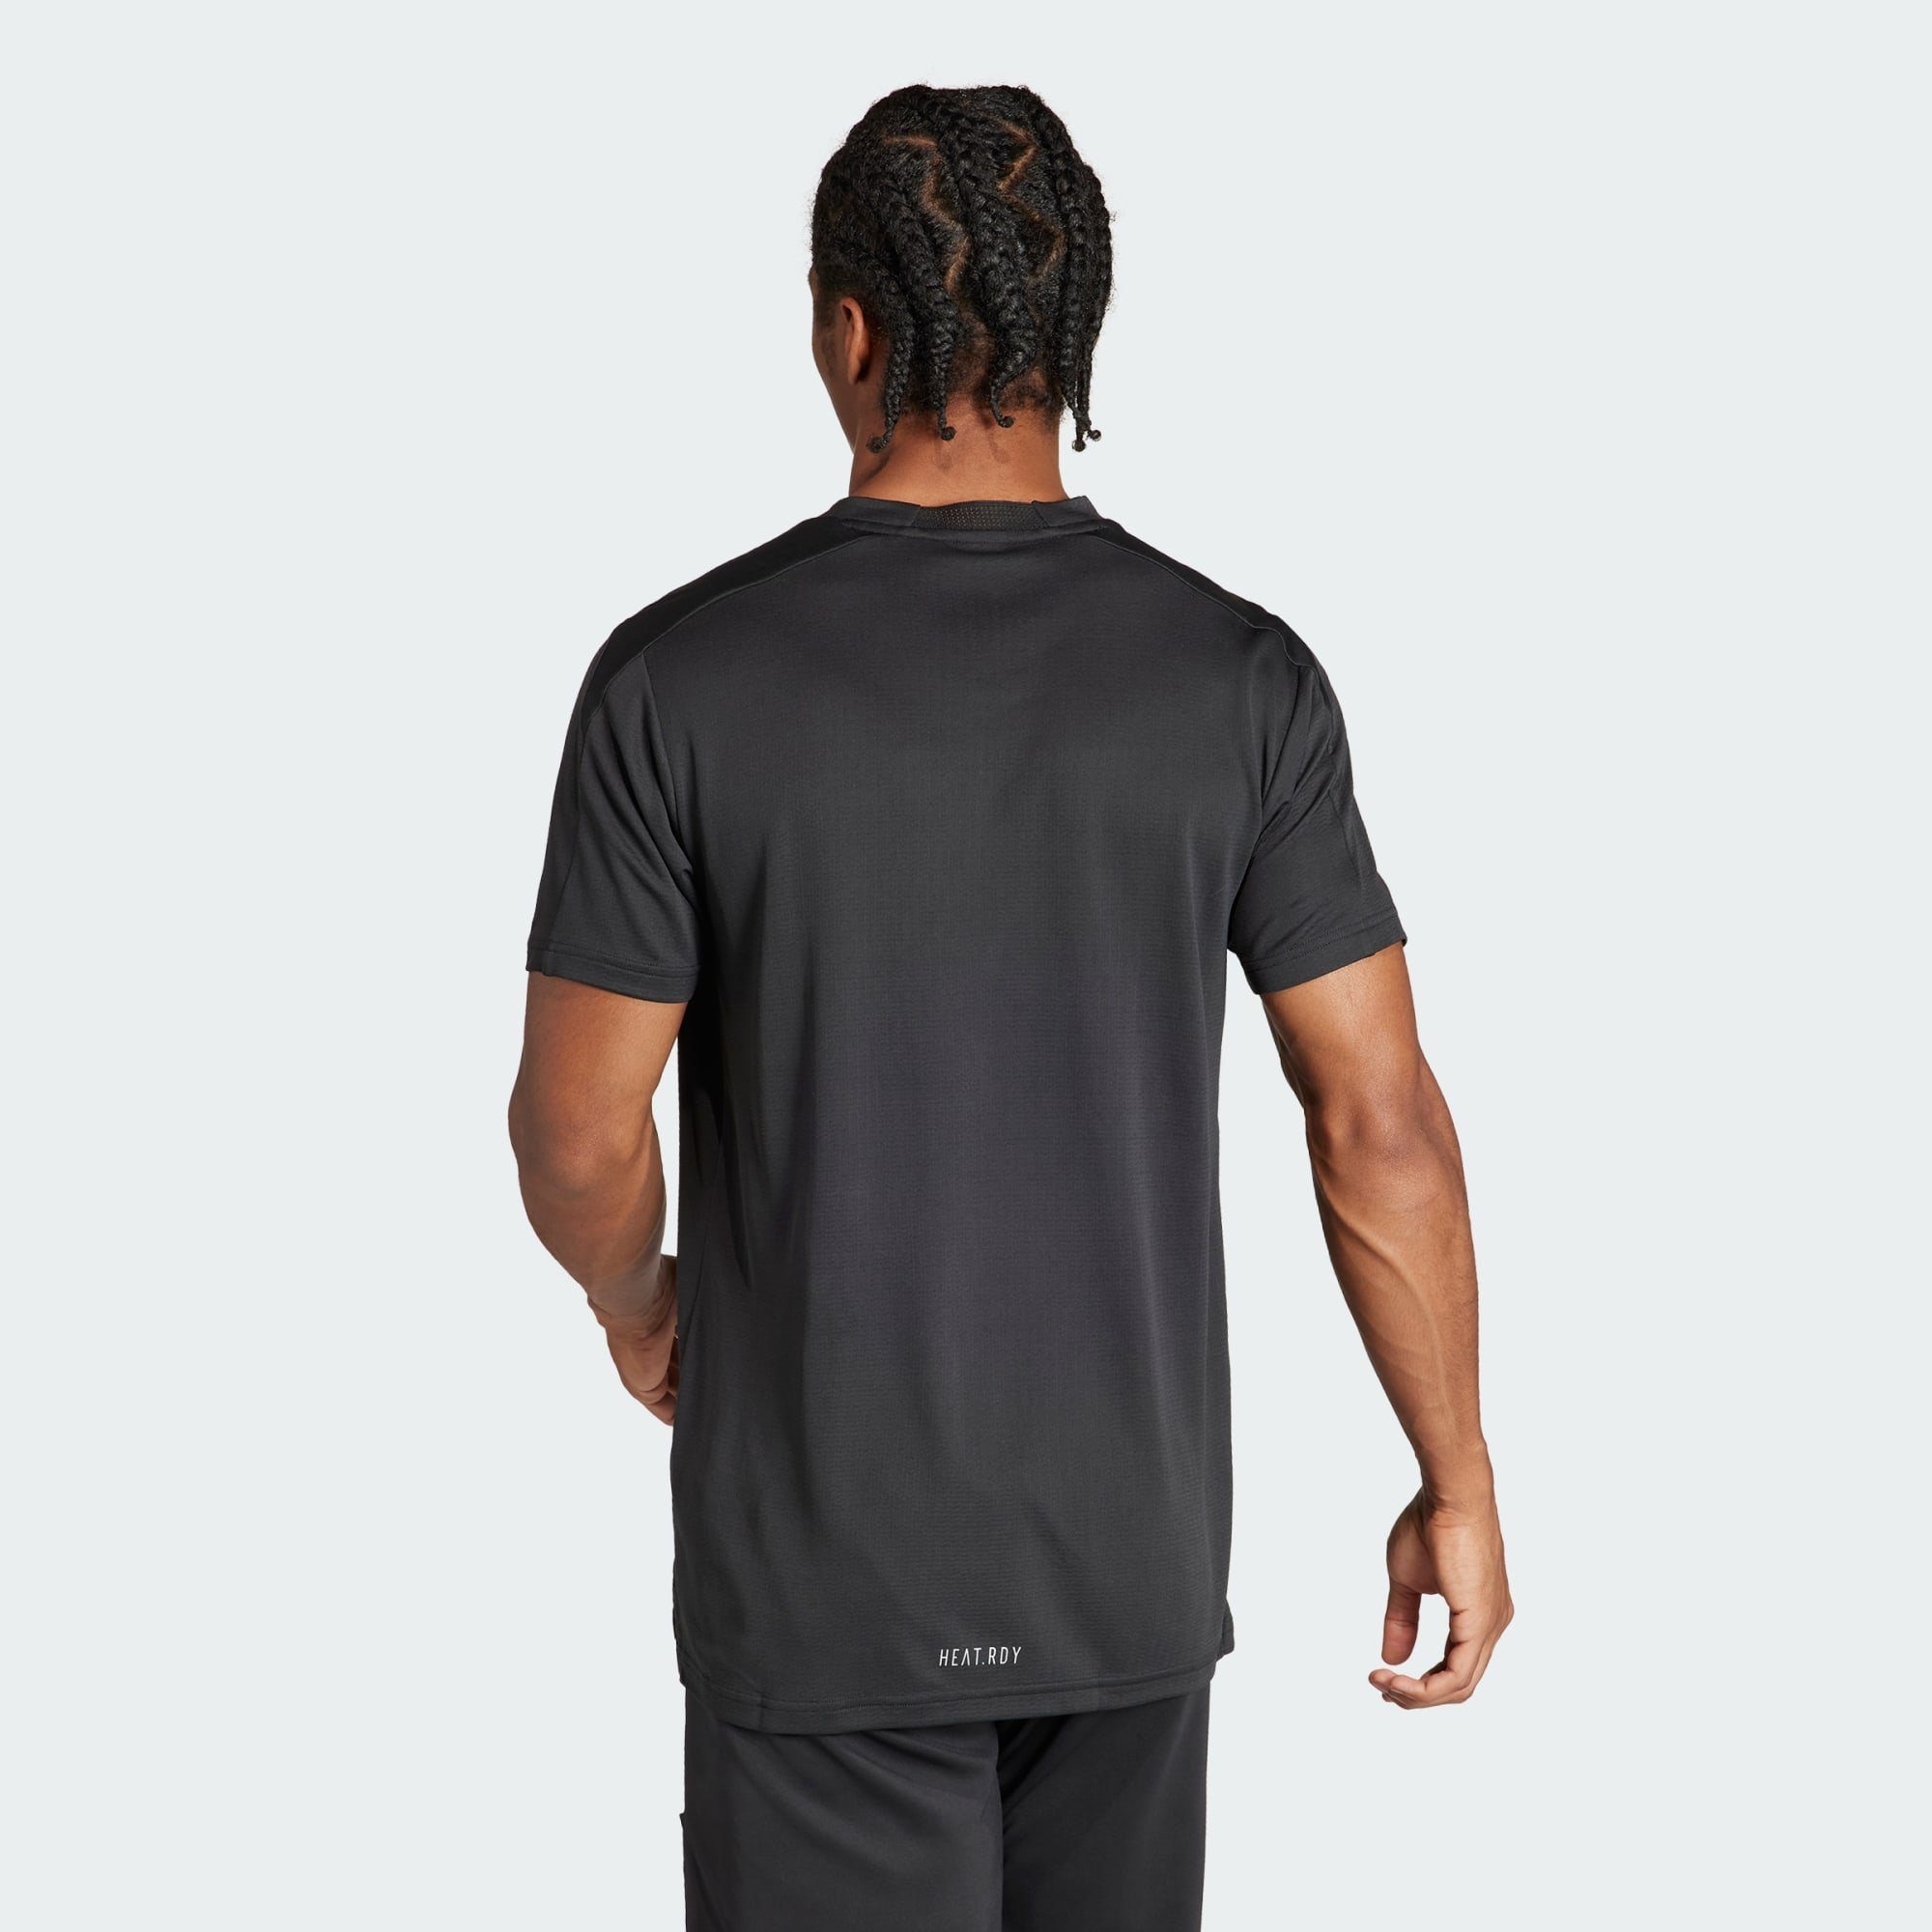 DESIGNED Black TEE adidas WORKOUT FOR TRAINING Performance HEAT.RDY Funktionsshirt HIIT